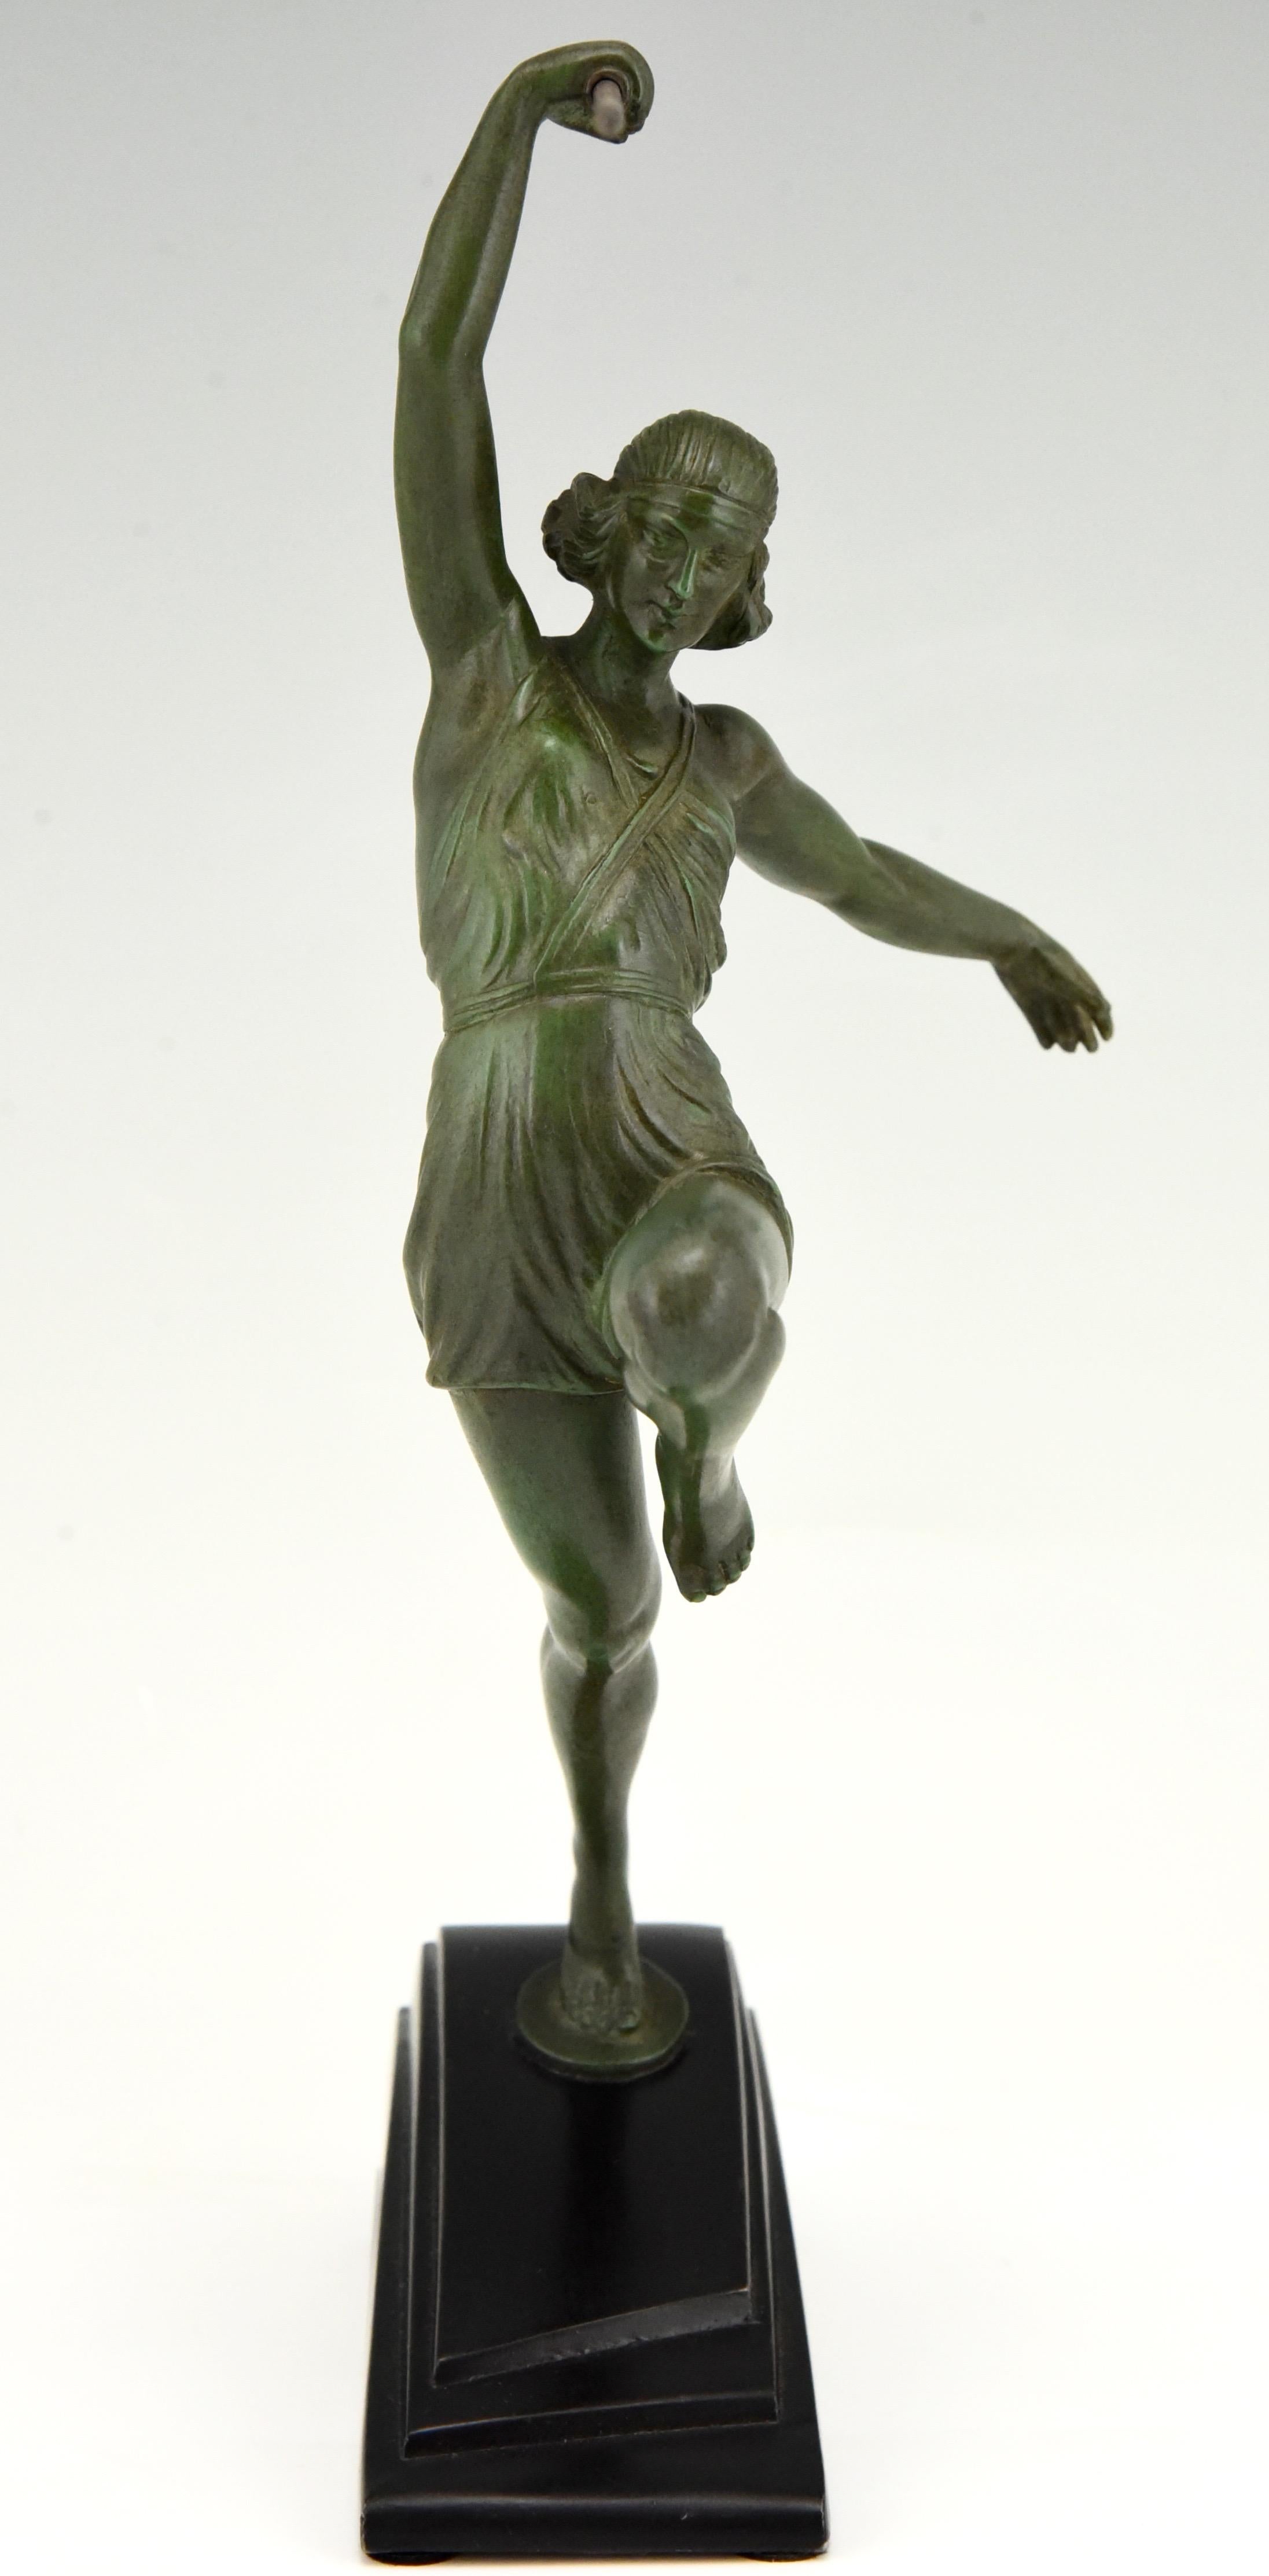 Patinated Art Deco Sculpture Javelin Thrower Fayral, Pierre Le Faguays for Le Verrier 1930